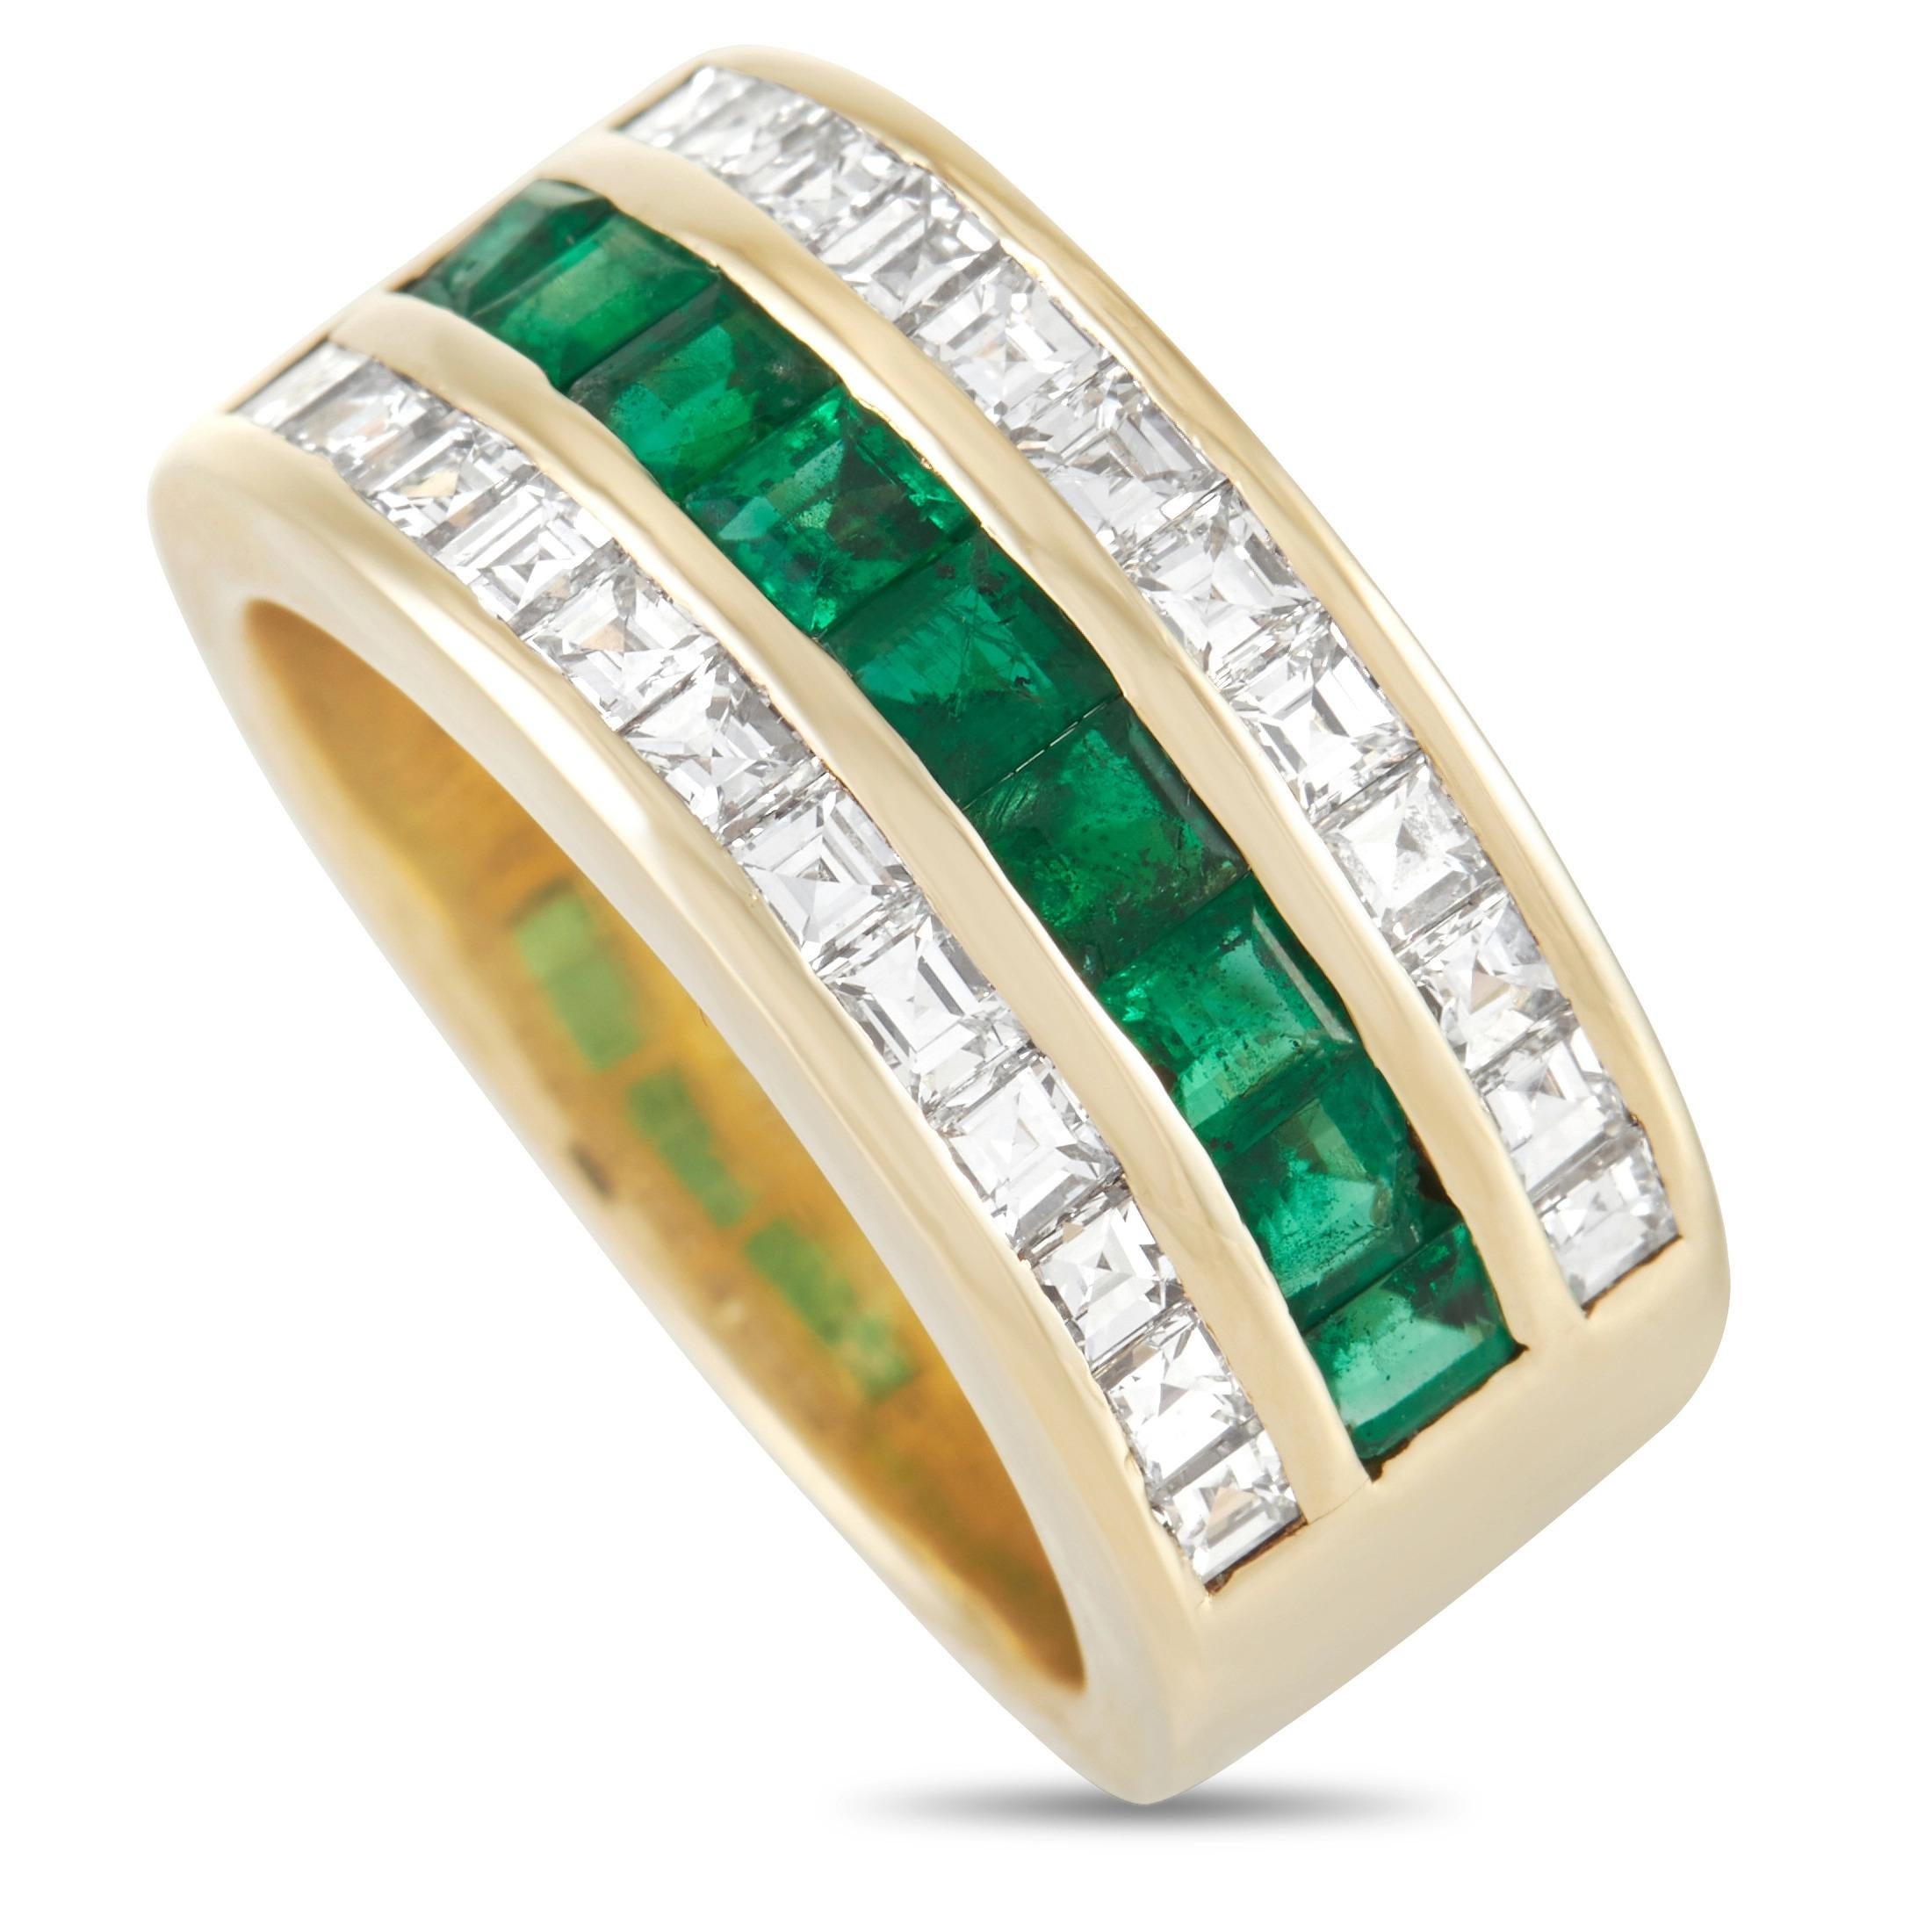 Shimmering gemstones are beautifully juxtaposed upon this elegant 18K Yellow Gold band ring from Tiffany & Co. In the center, a row of deep green emeralds with a total weight of 0.80 carats adds a pop of color to this dynamic design. It’s